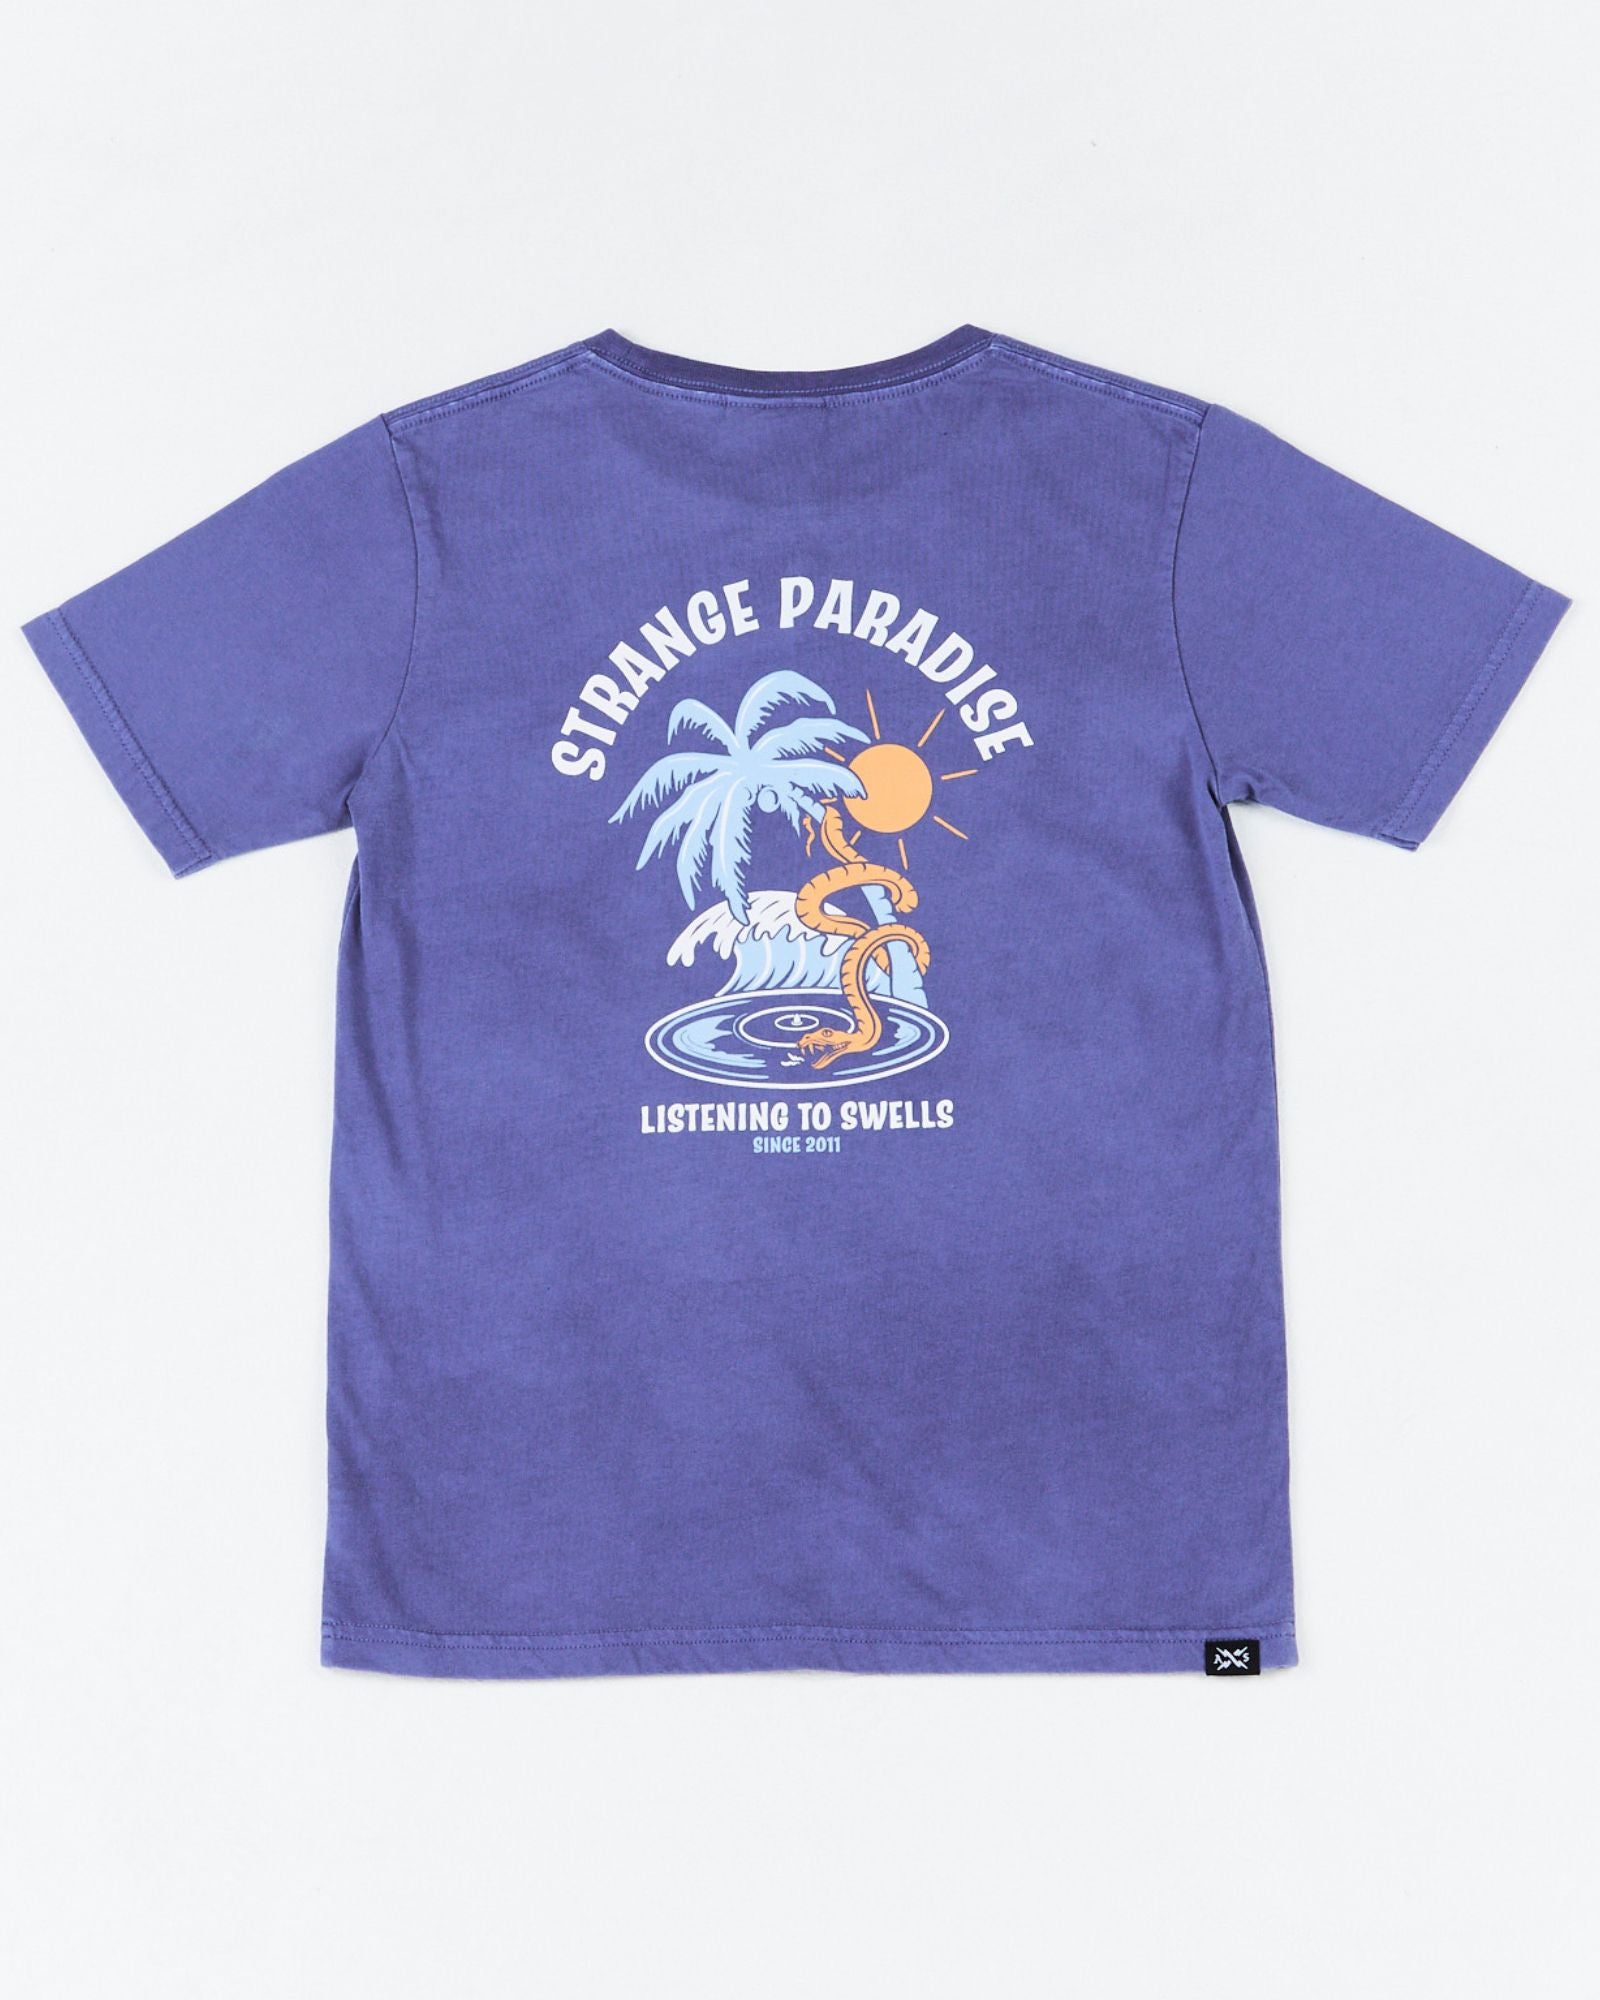 Alphabet Soup's Kids Ripple Tee for boys aged 2-7. Featuring 100% cotton, pigment dye in ocean blue hues & front/back retro surf print “Strange Paradise”.